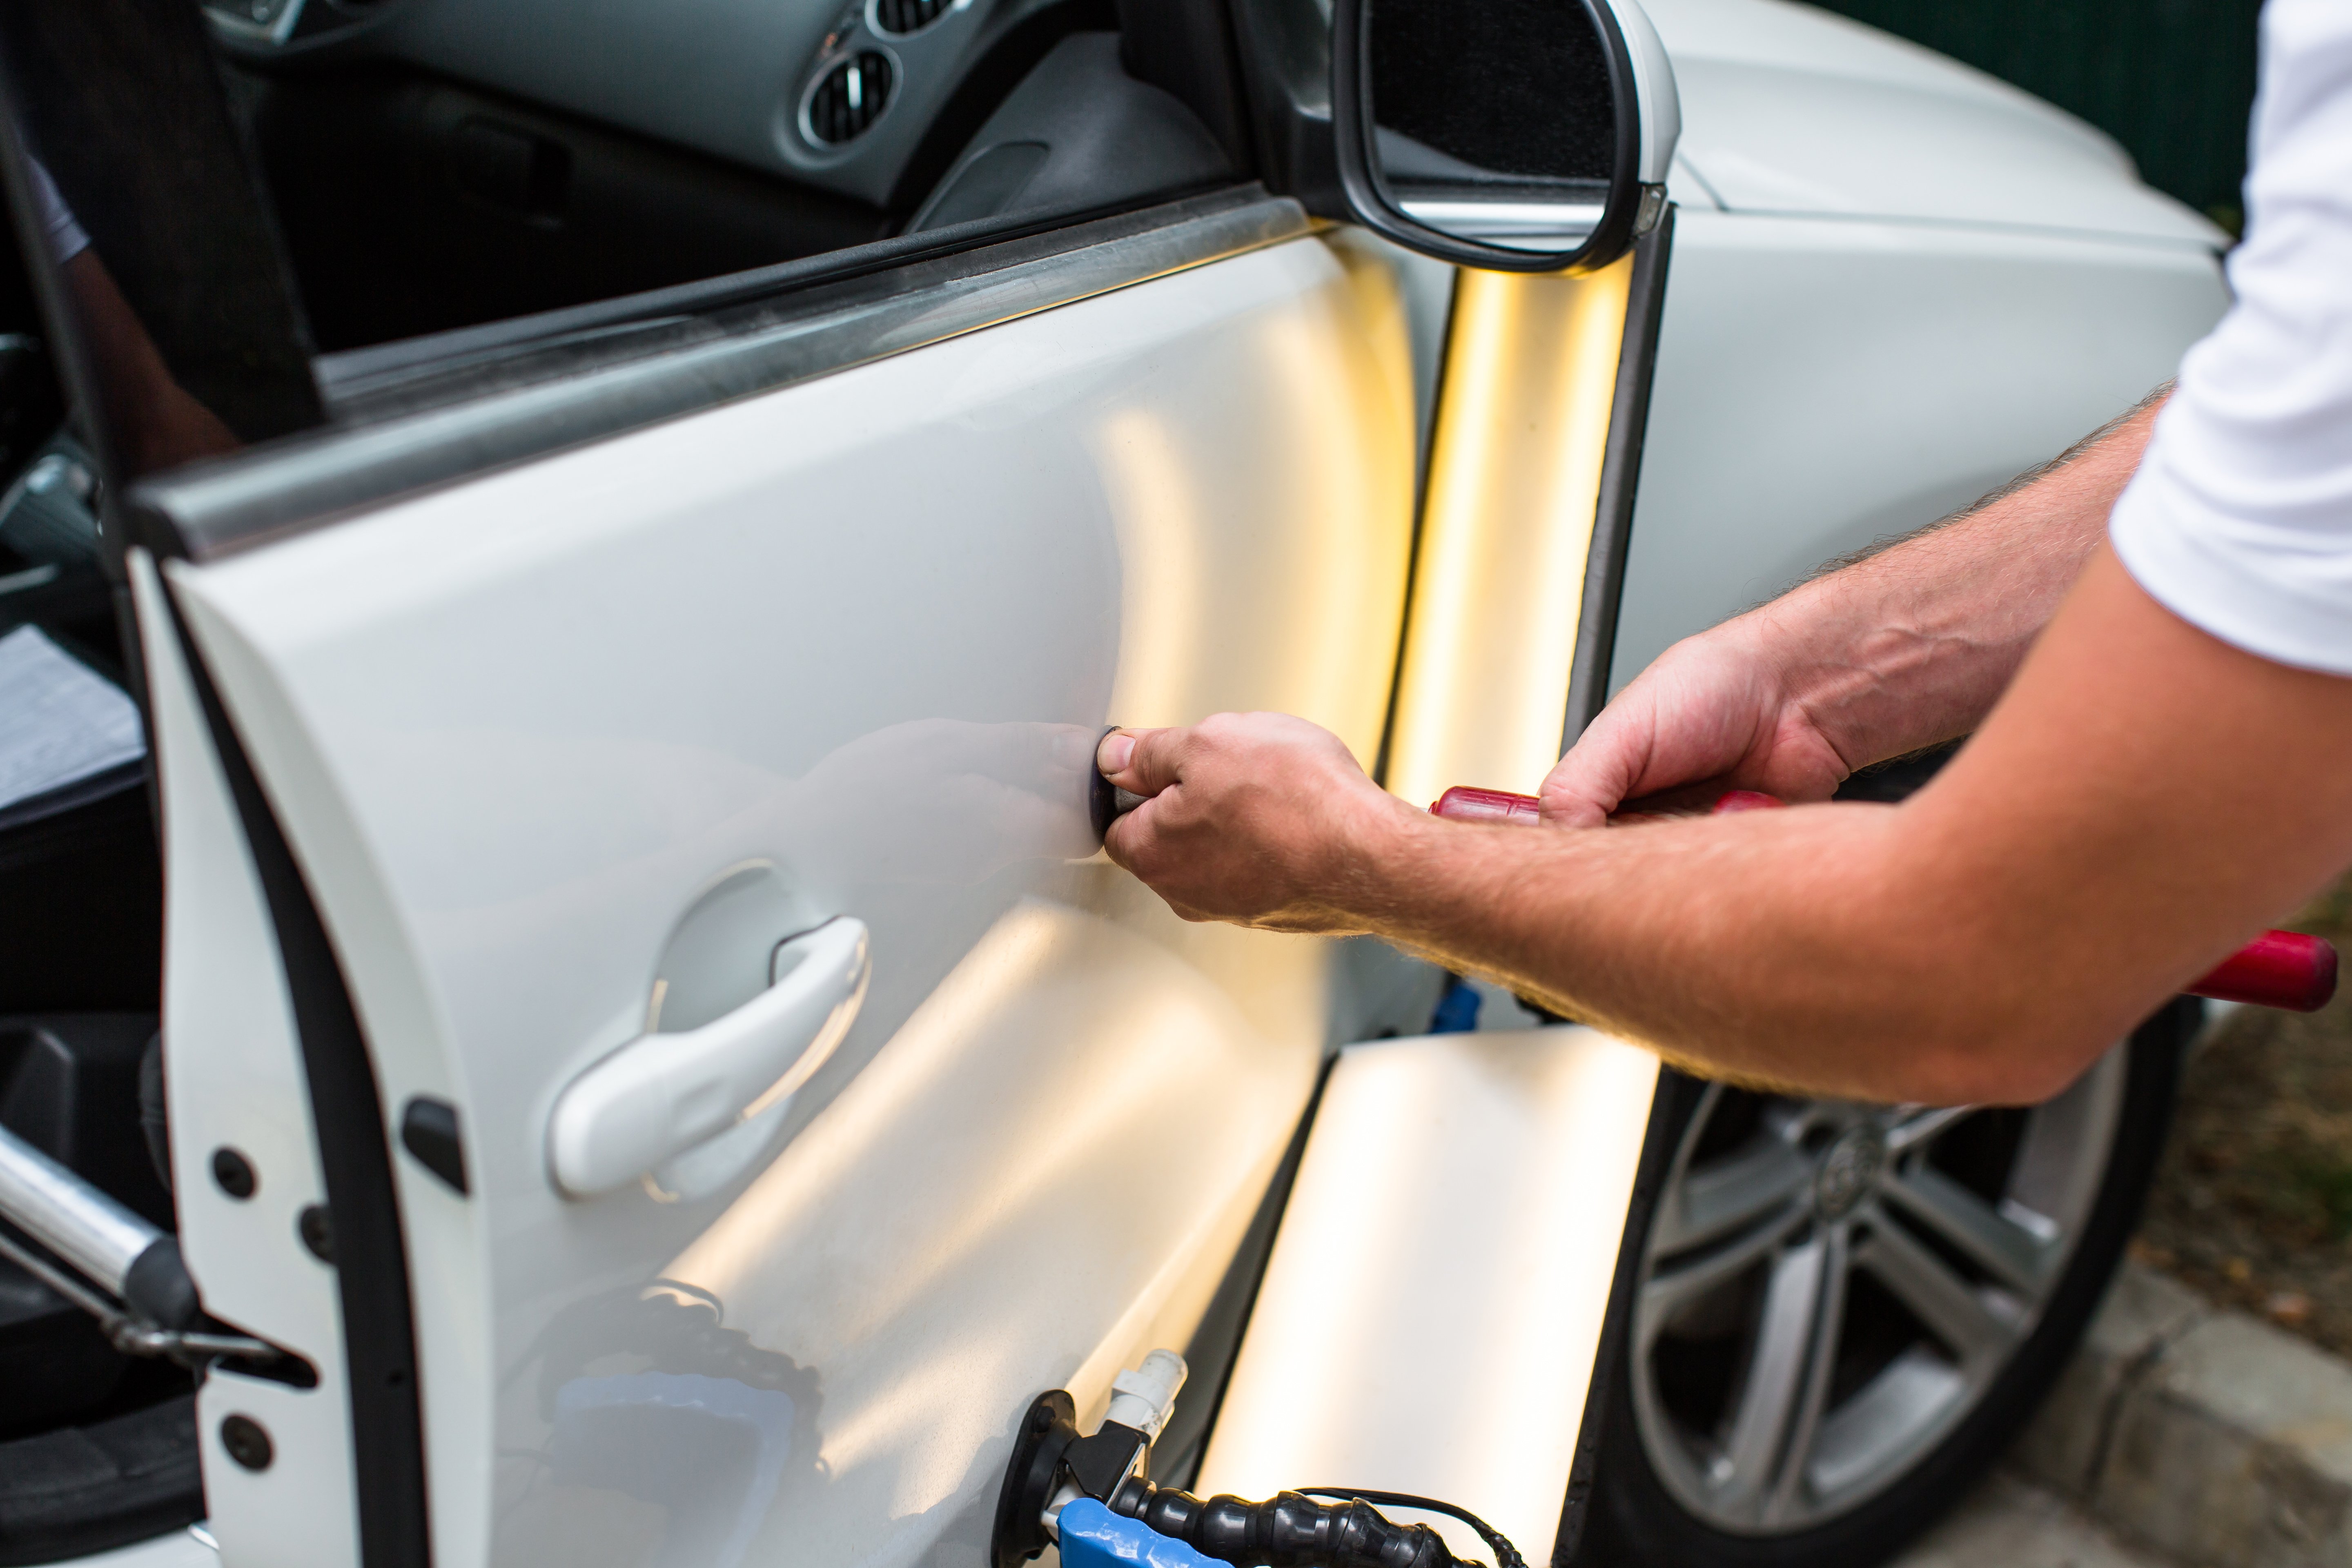 Scratch removal: first aid for your paint-damaged car